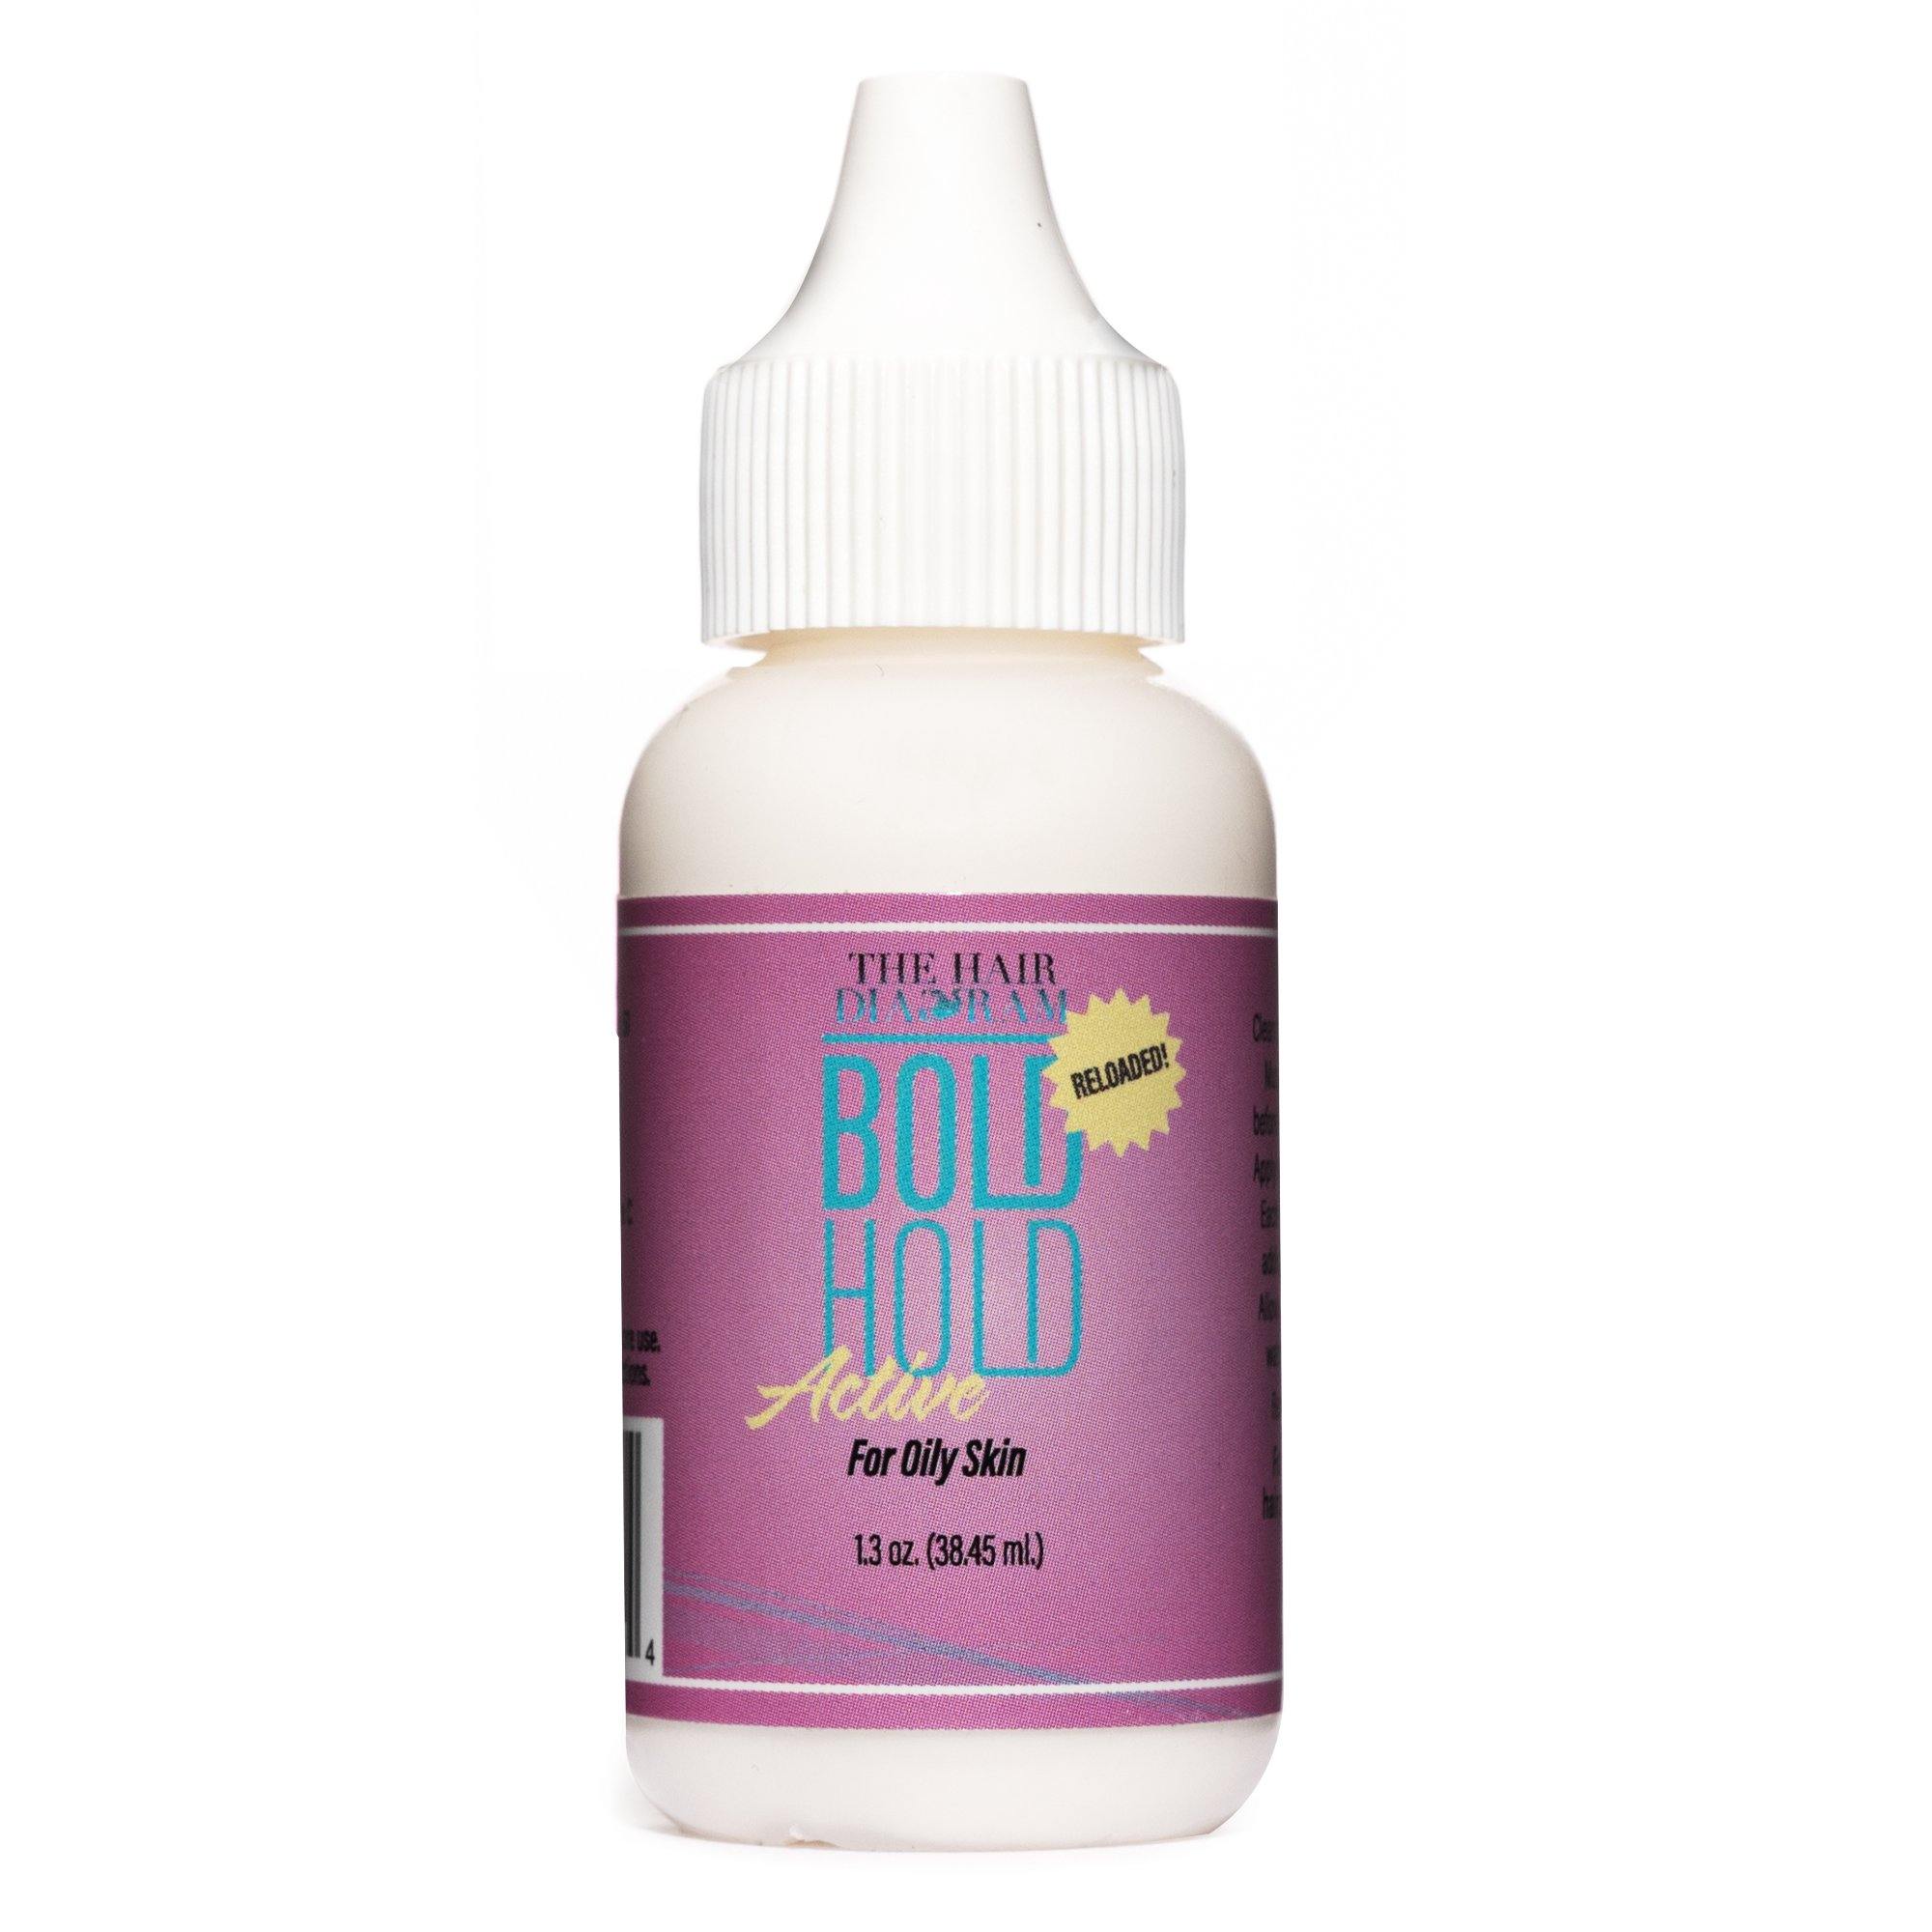 BOLD HOLD ACTIVE 1.3OZ